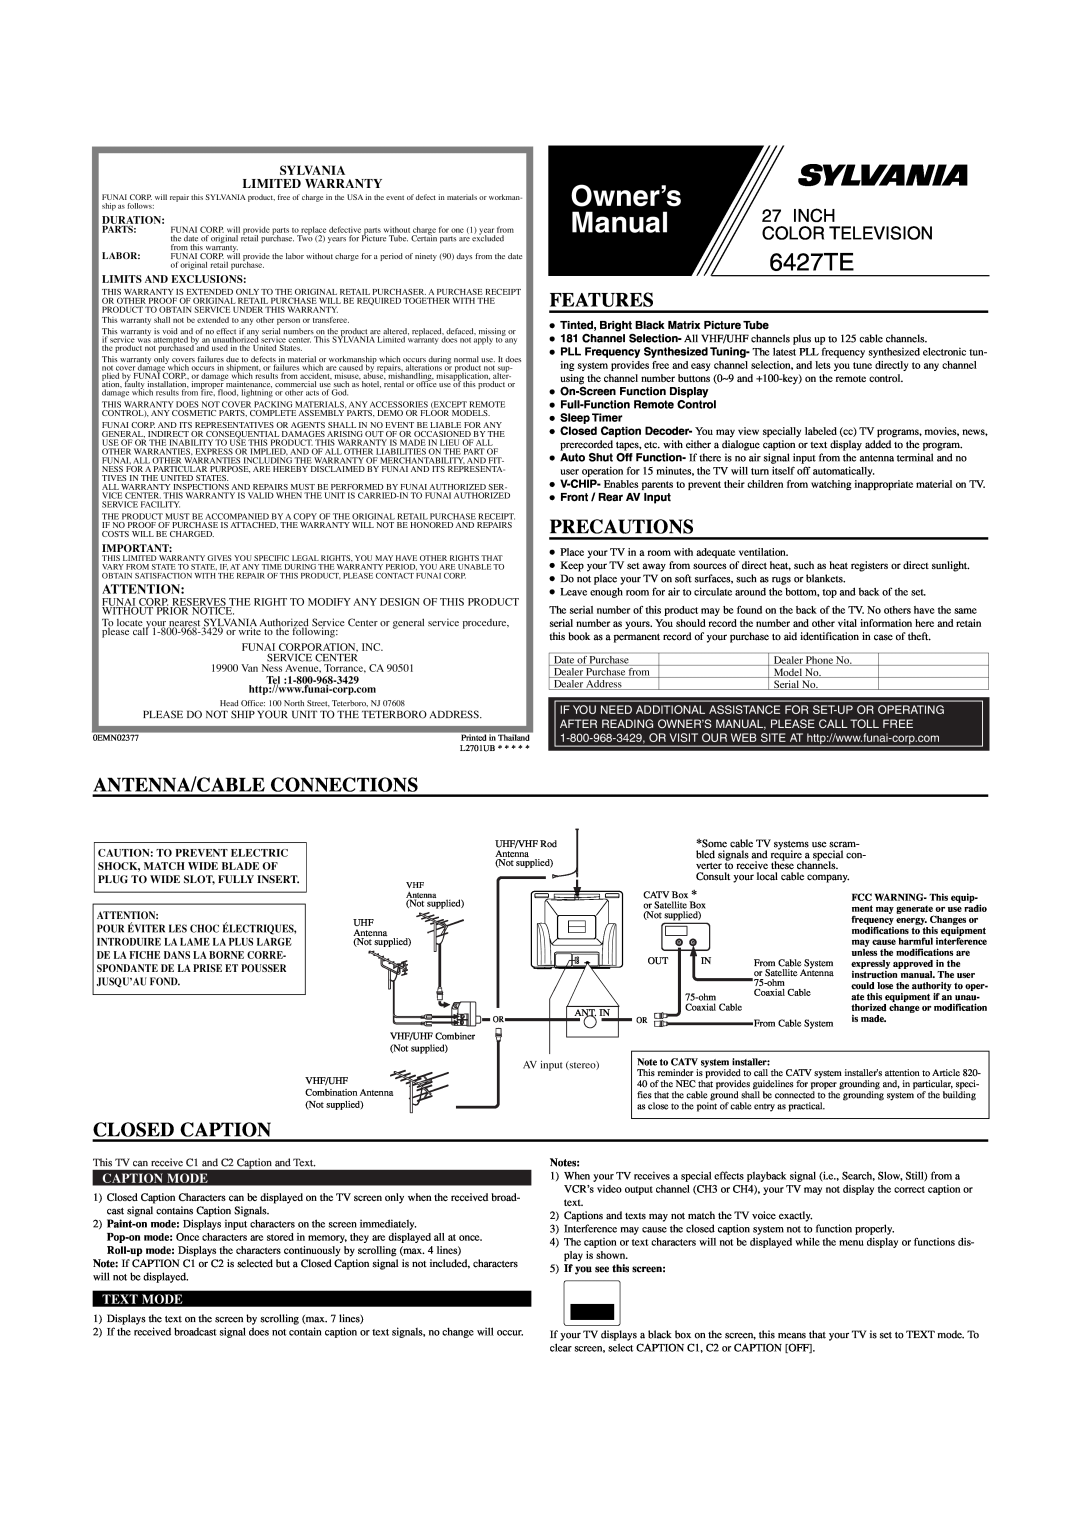 Sylvania 6427TE owner manual Features, Precautions, Antenna/Cable Connections, Closed Caption, Sylvania Limited Warranty 